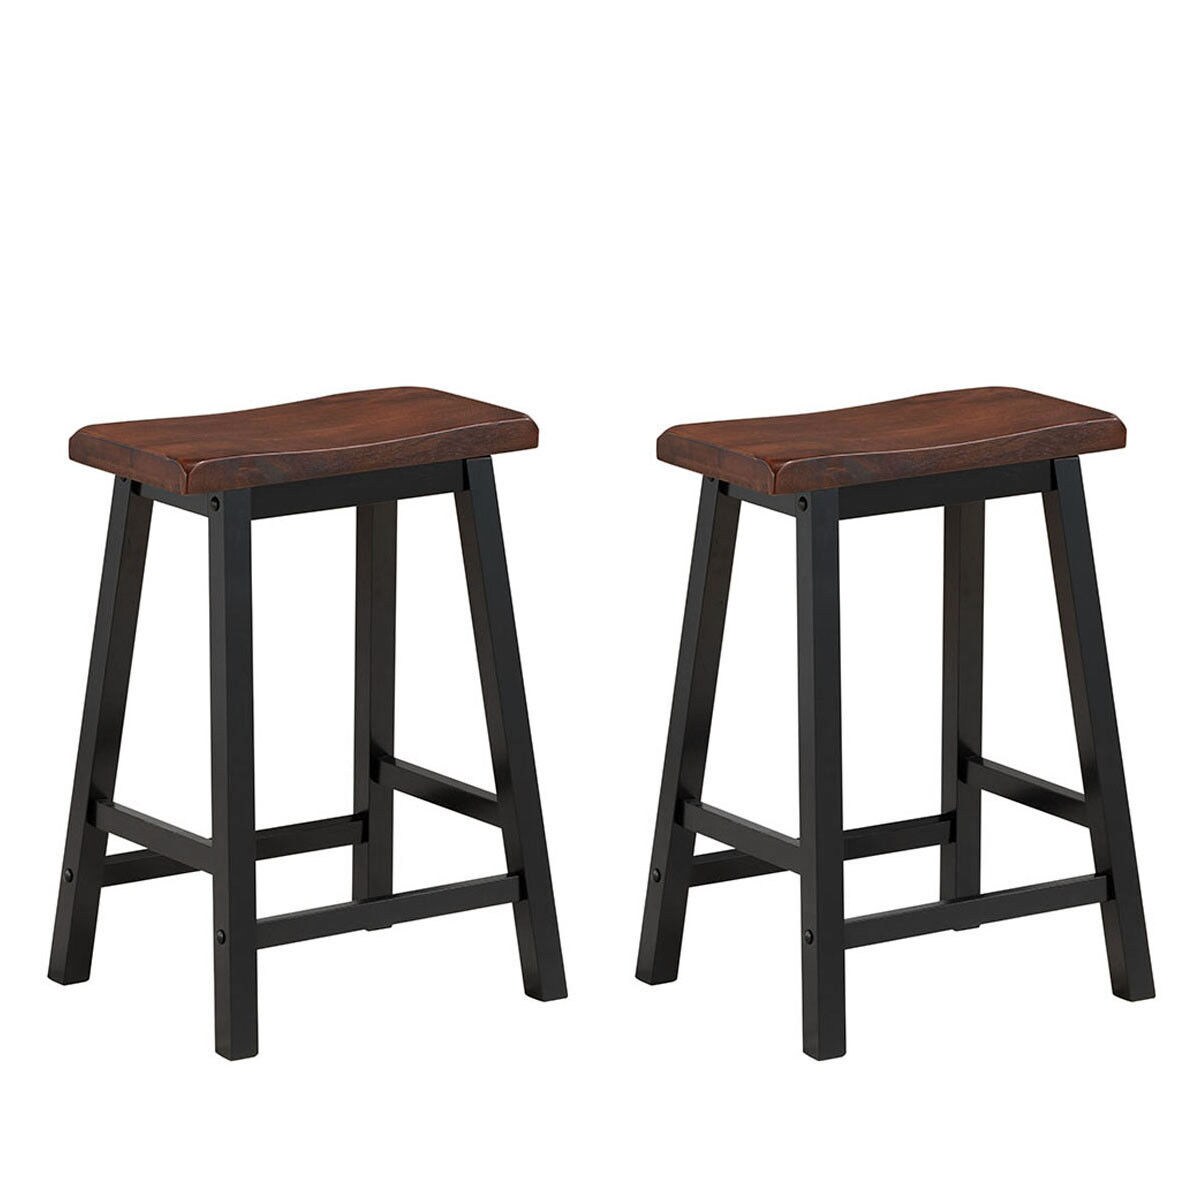 Gymax Set of 2 Bar Stools 24H Saddle Seat Pub Chair Home Kitchen Dining Room Brown